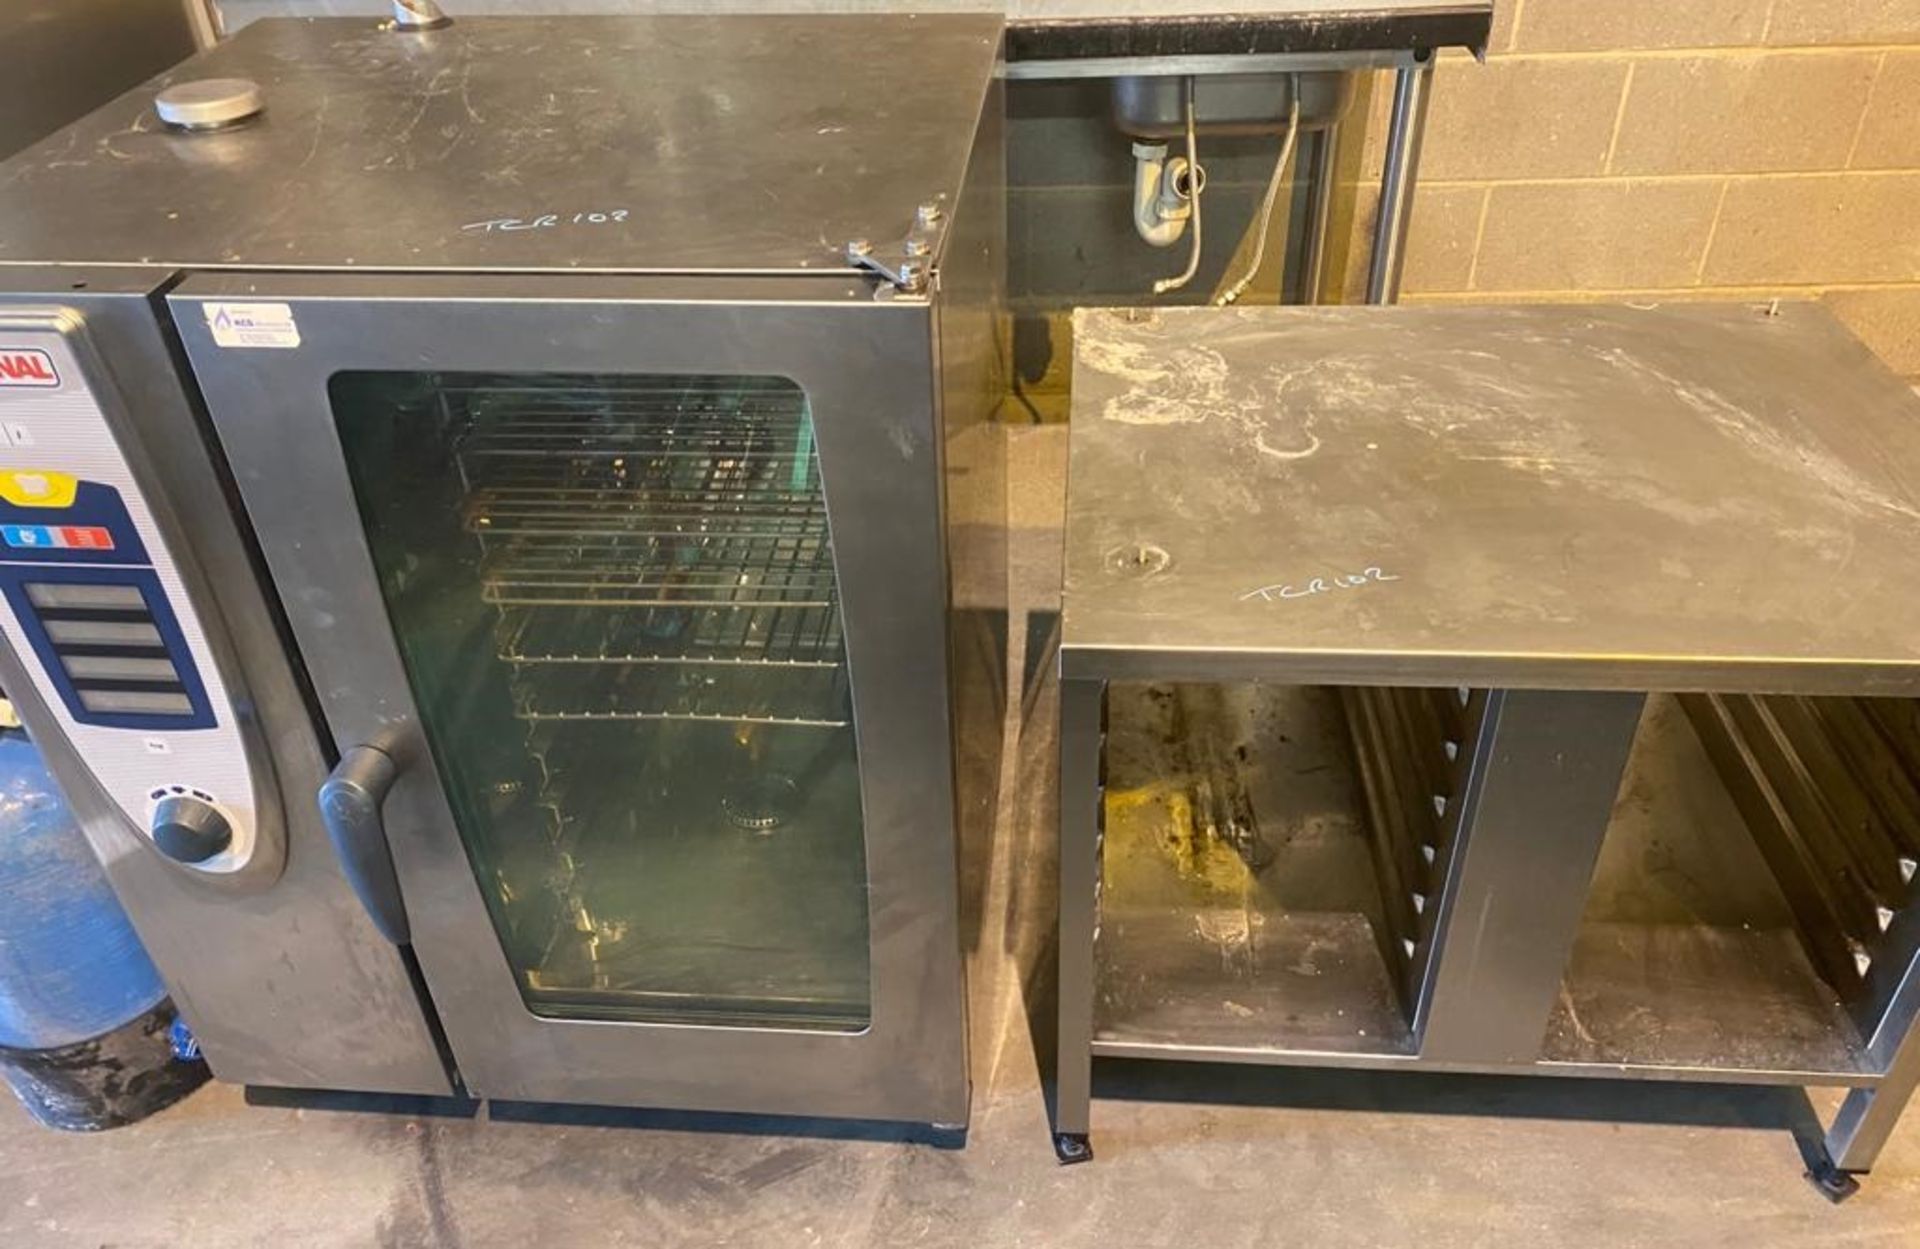 1 x Rational 10 Grid SCC101 Self Cooking Centre Combination Oven With Stand - 3 Phase - Image 8 of 11